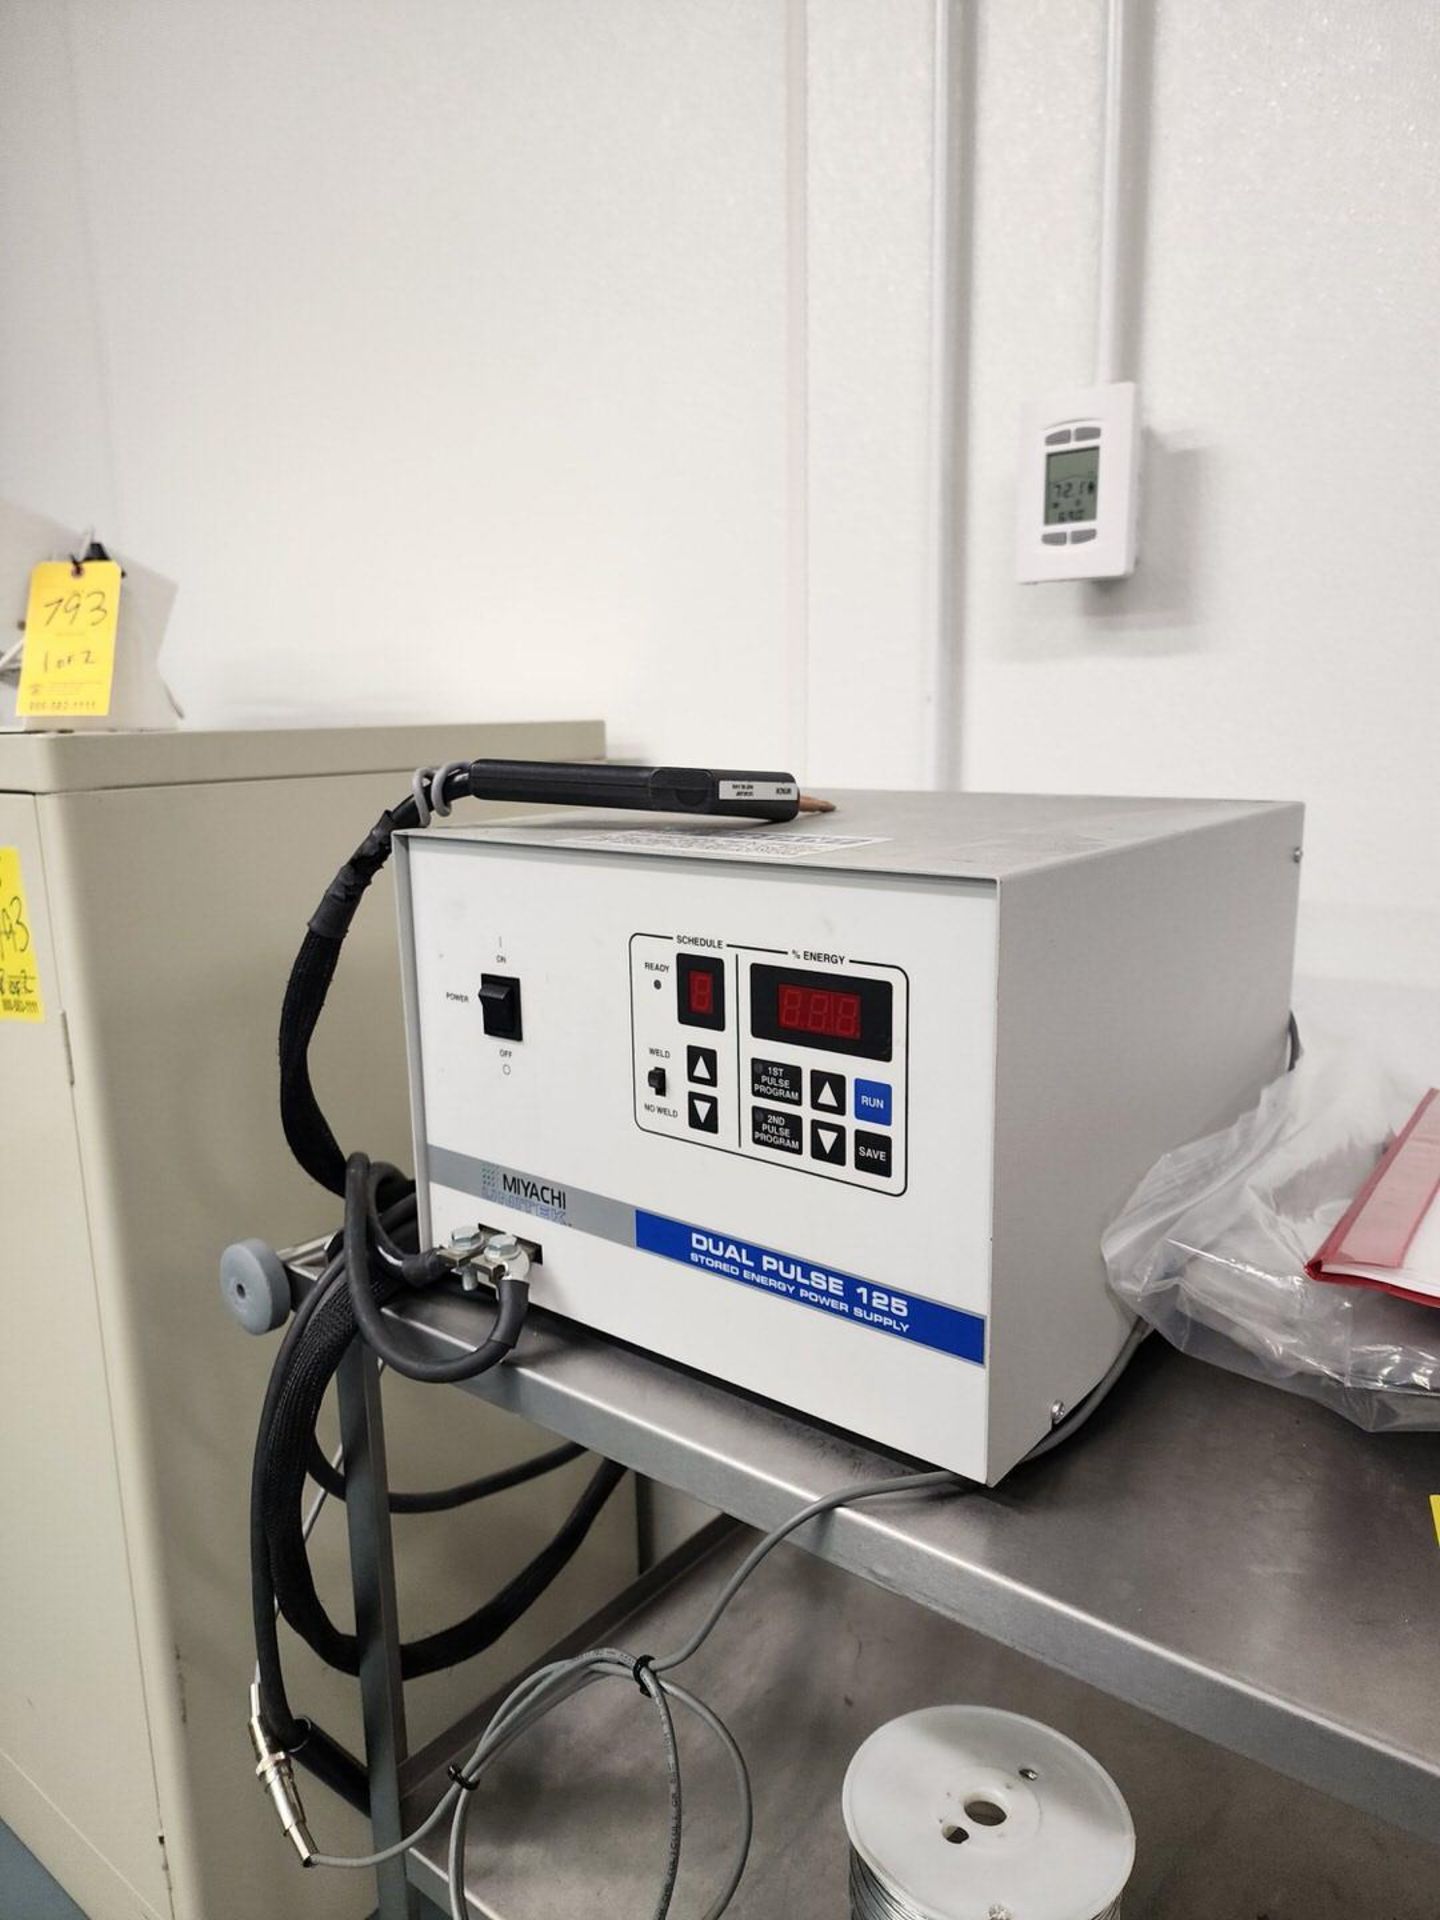 Miyachi Dual Pulse 125 Stored Energy Resistance Welding Power Supply W/ Contents - Image 4 of 9